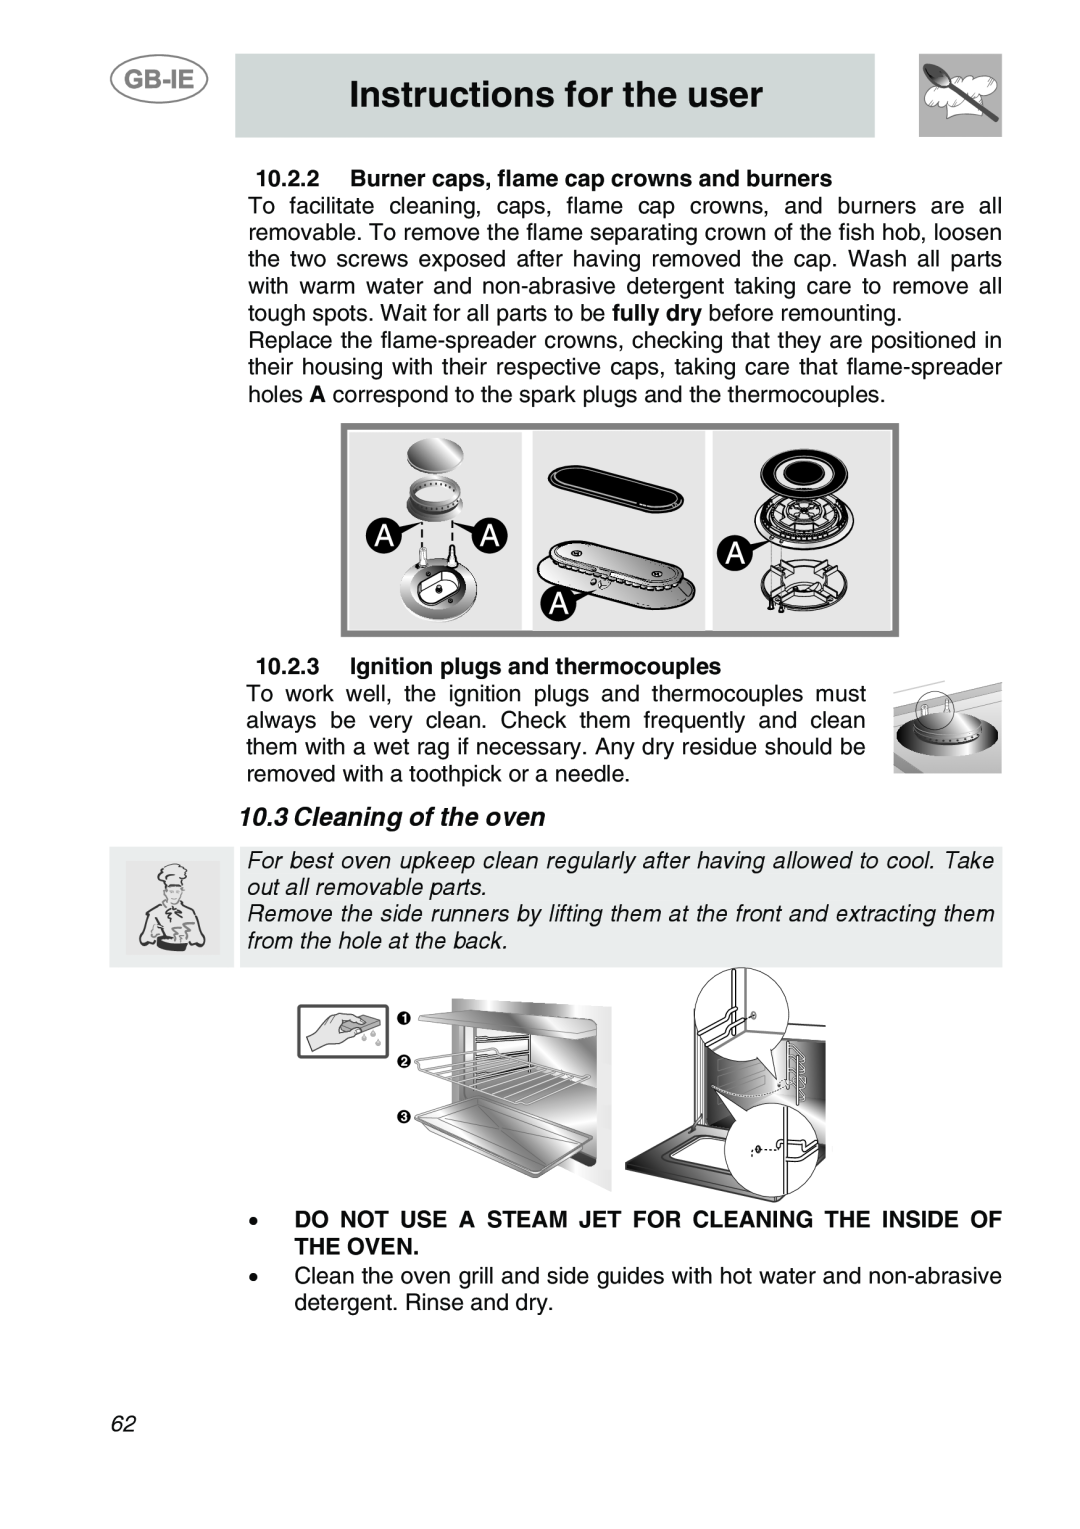 Smeg A1-6 manual Cleaning of the oven, Instructions for the user, Burner caps, flame cap crowns and burners 